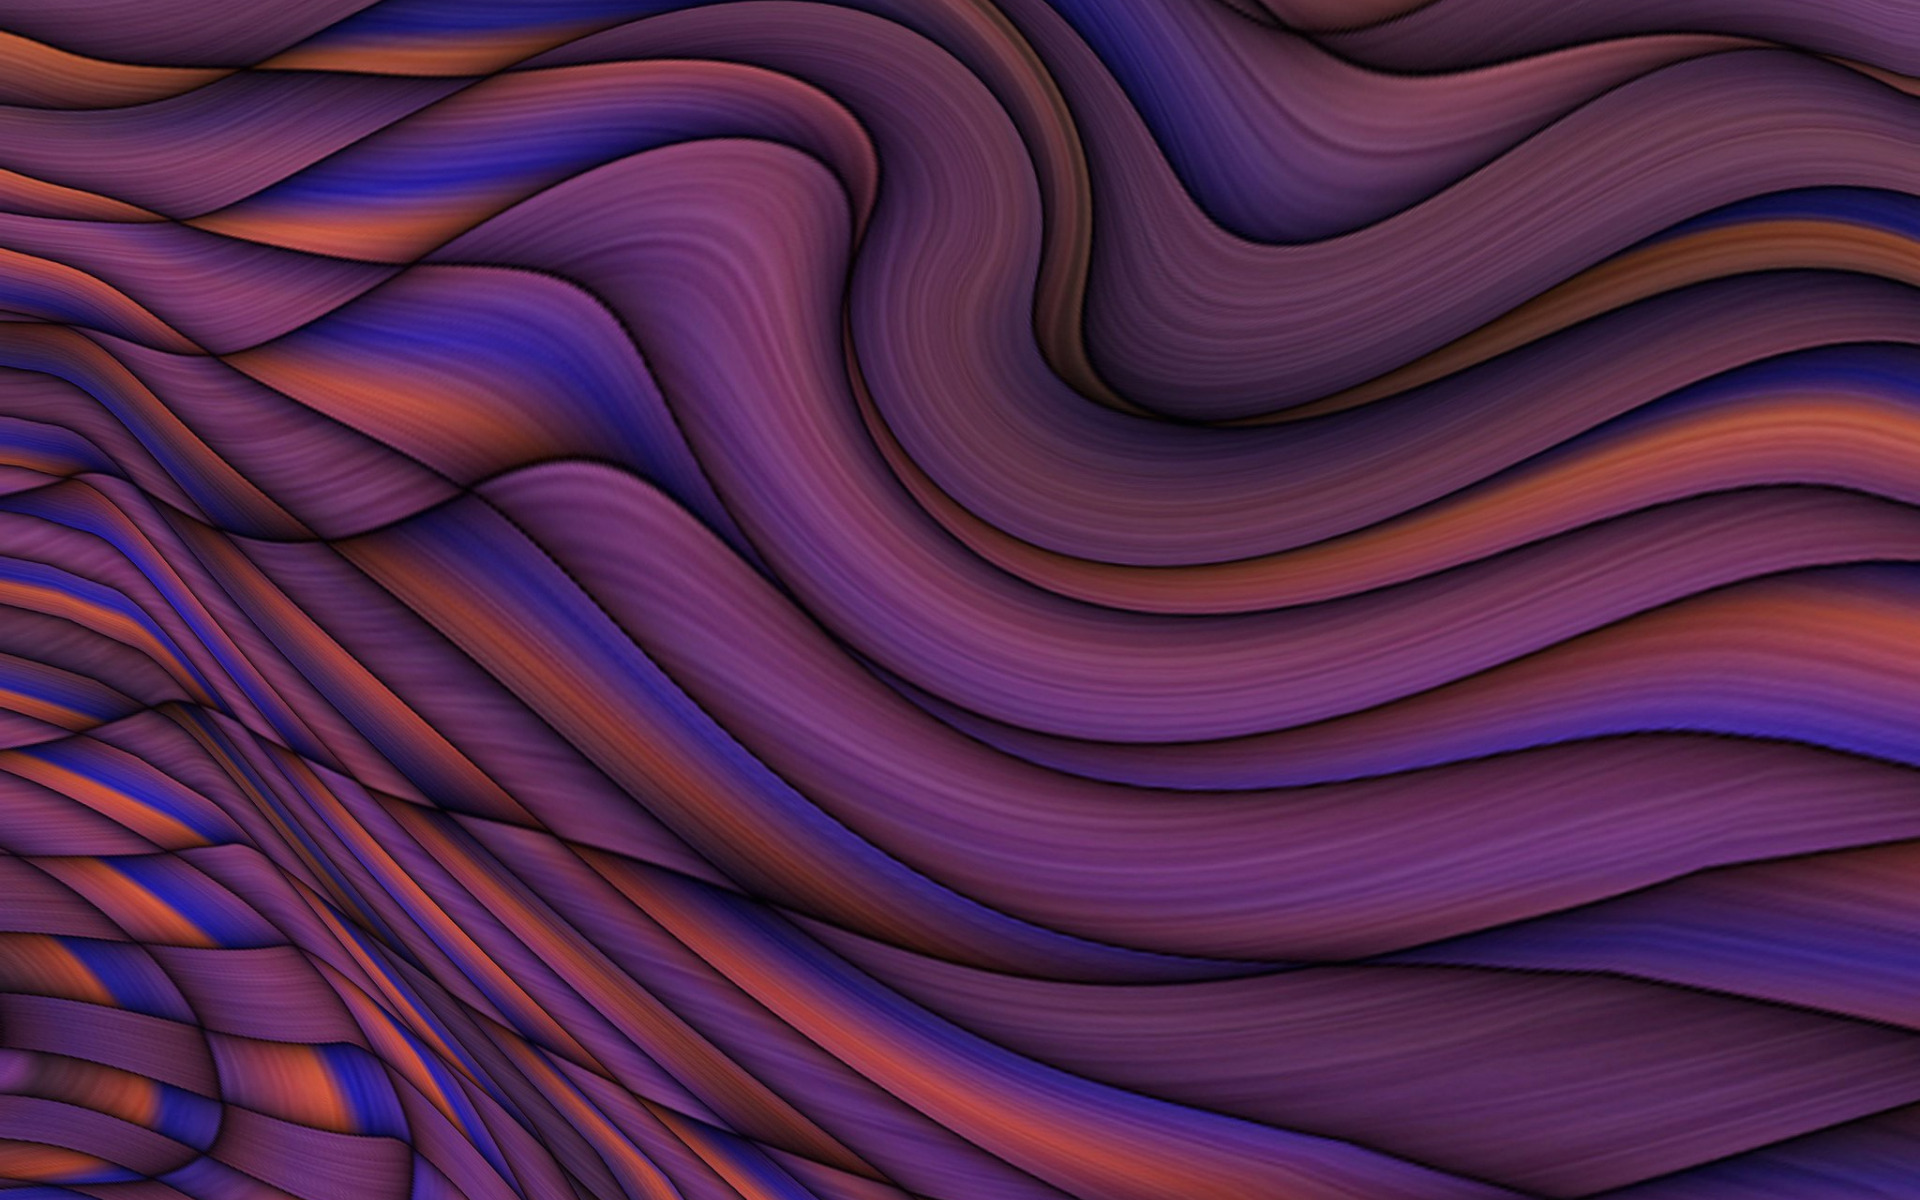 Download wallpaper purple waves abstraction, purple creative background, waves background, purple abstraction background for desktop with resolution 1920x1200. High Quality HD picture wallpaper